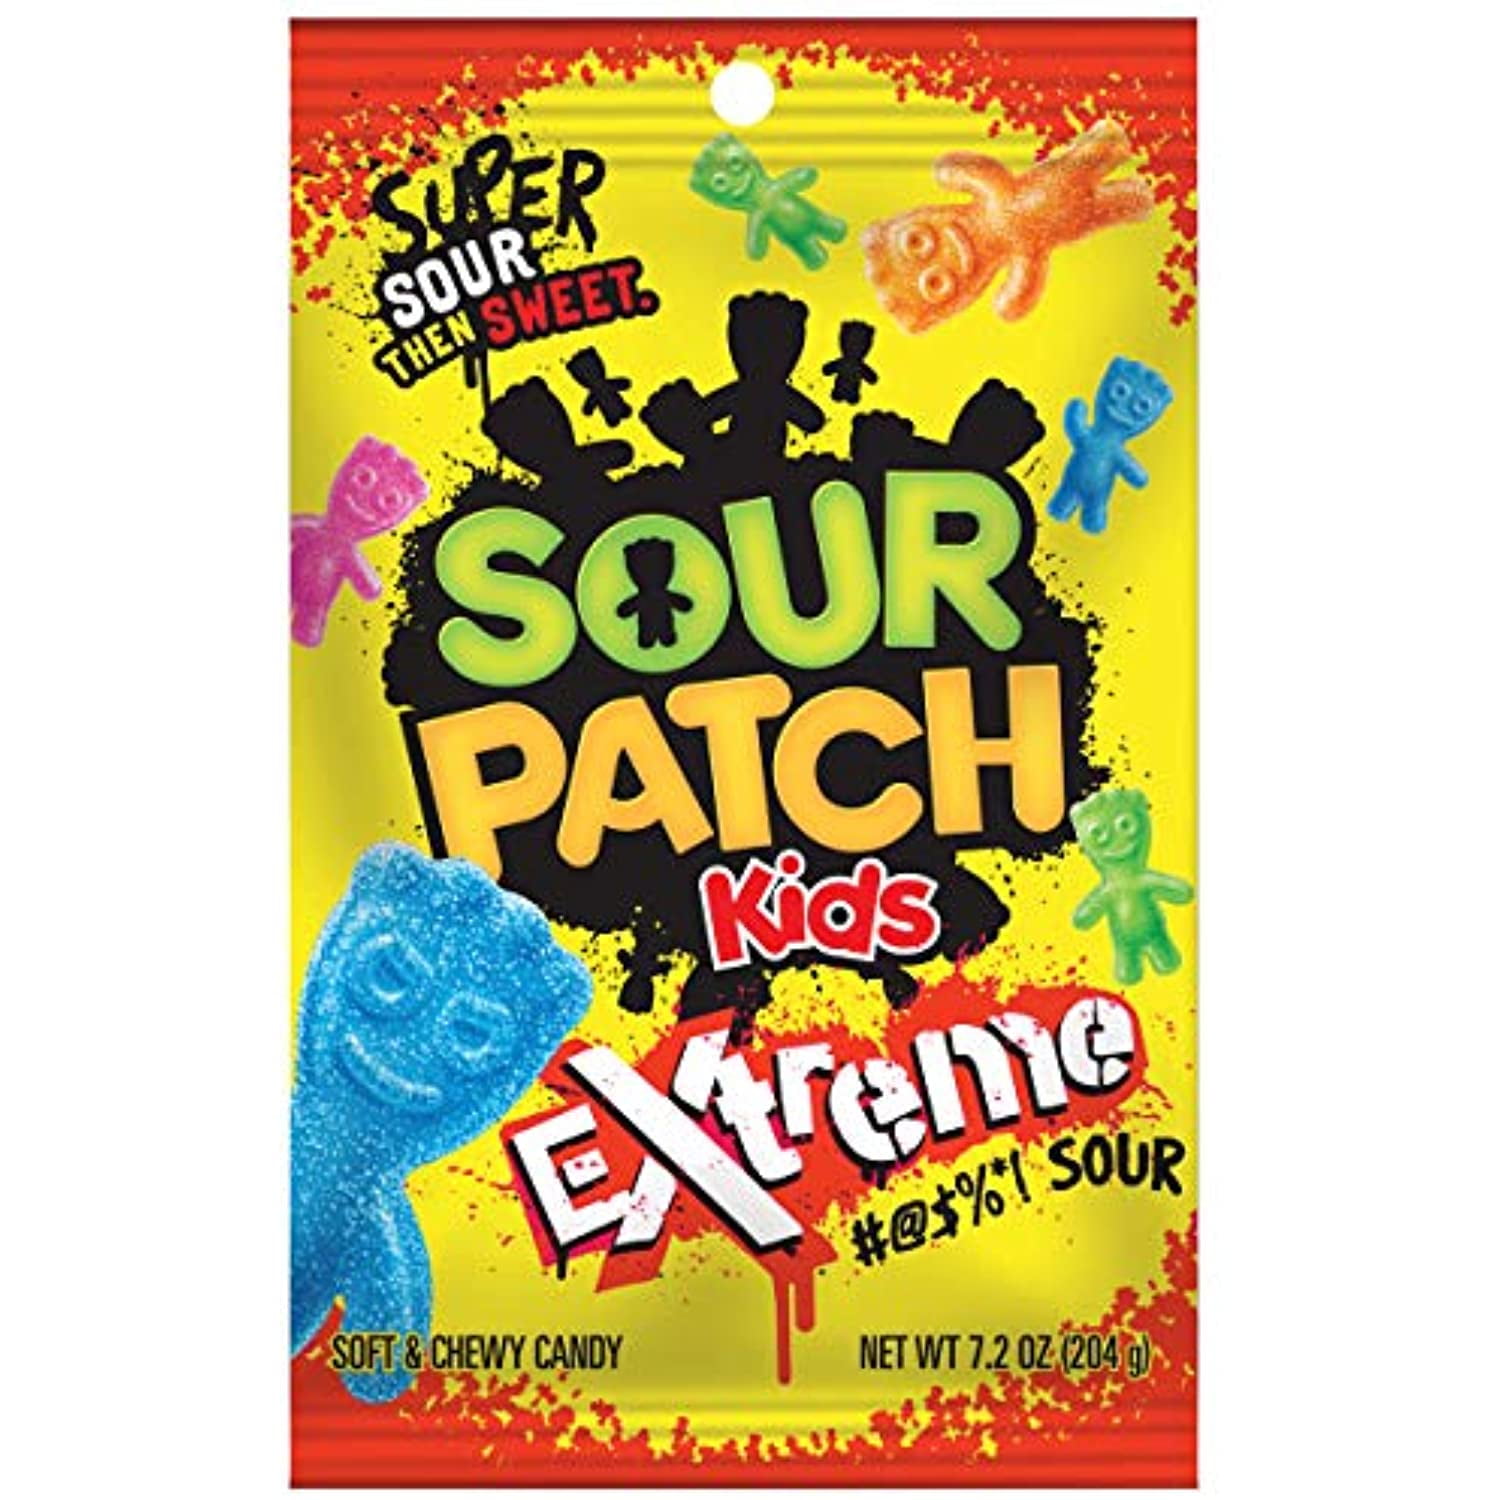 Sour Patch Kids Extreme Sour Soft & Chewy Candy 12 - 4 oz Bags